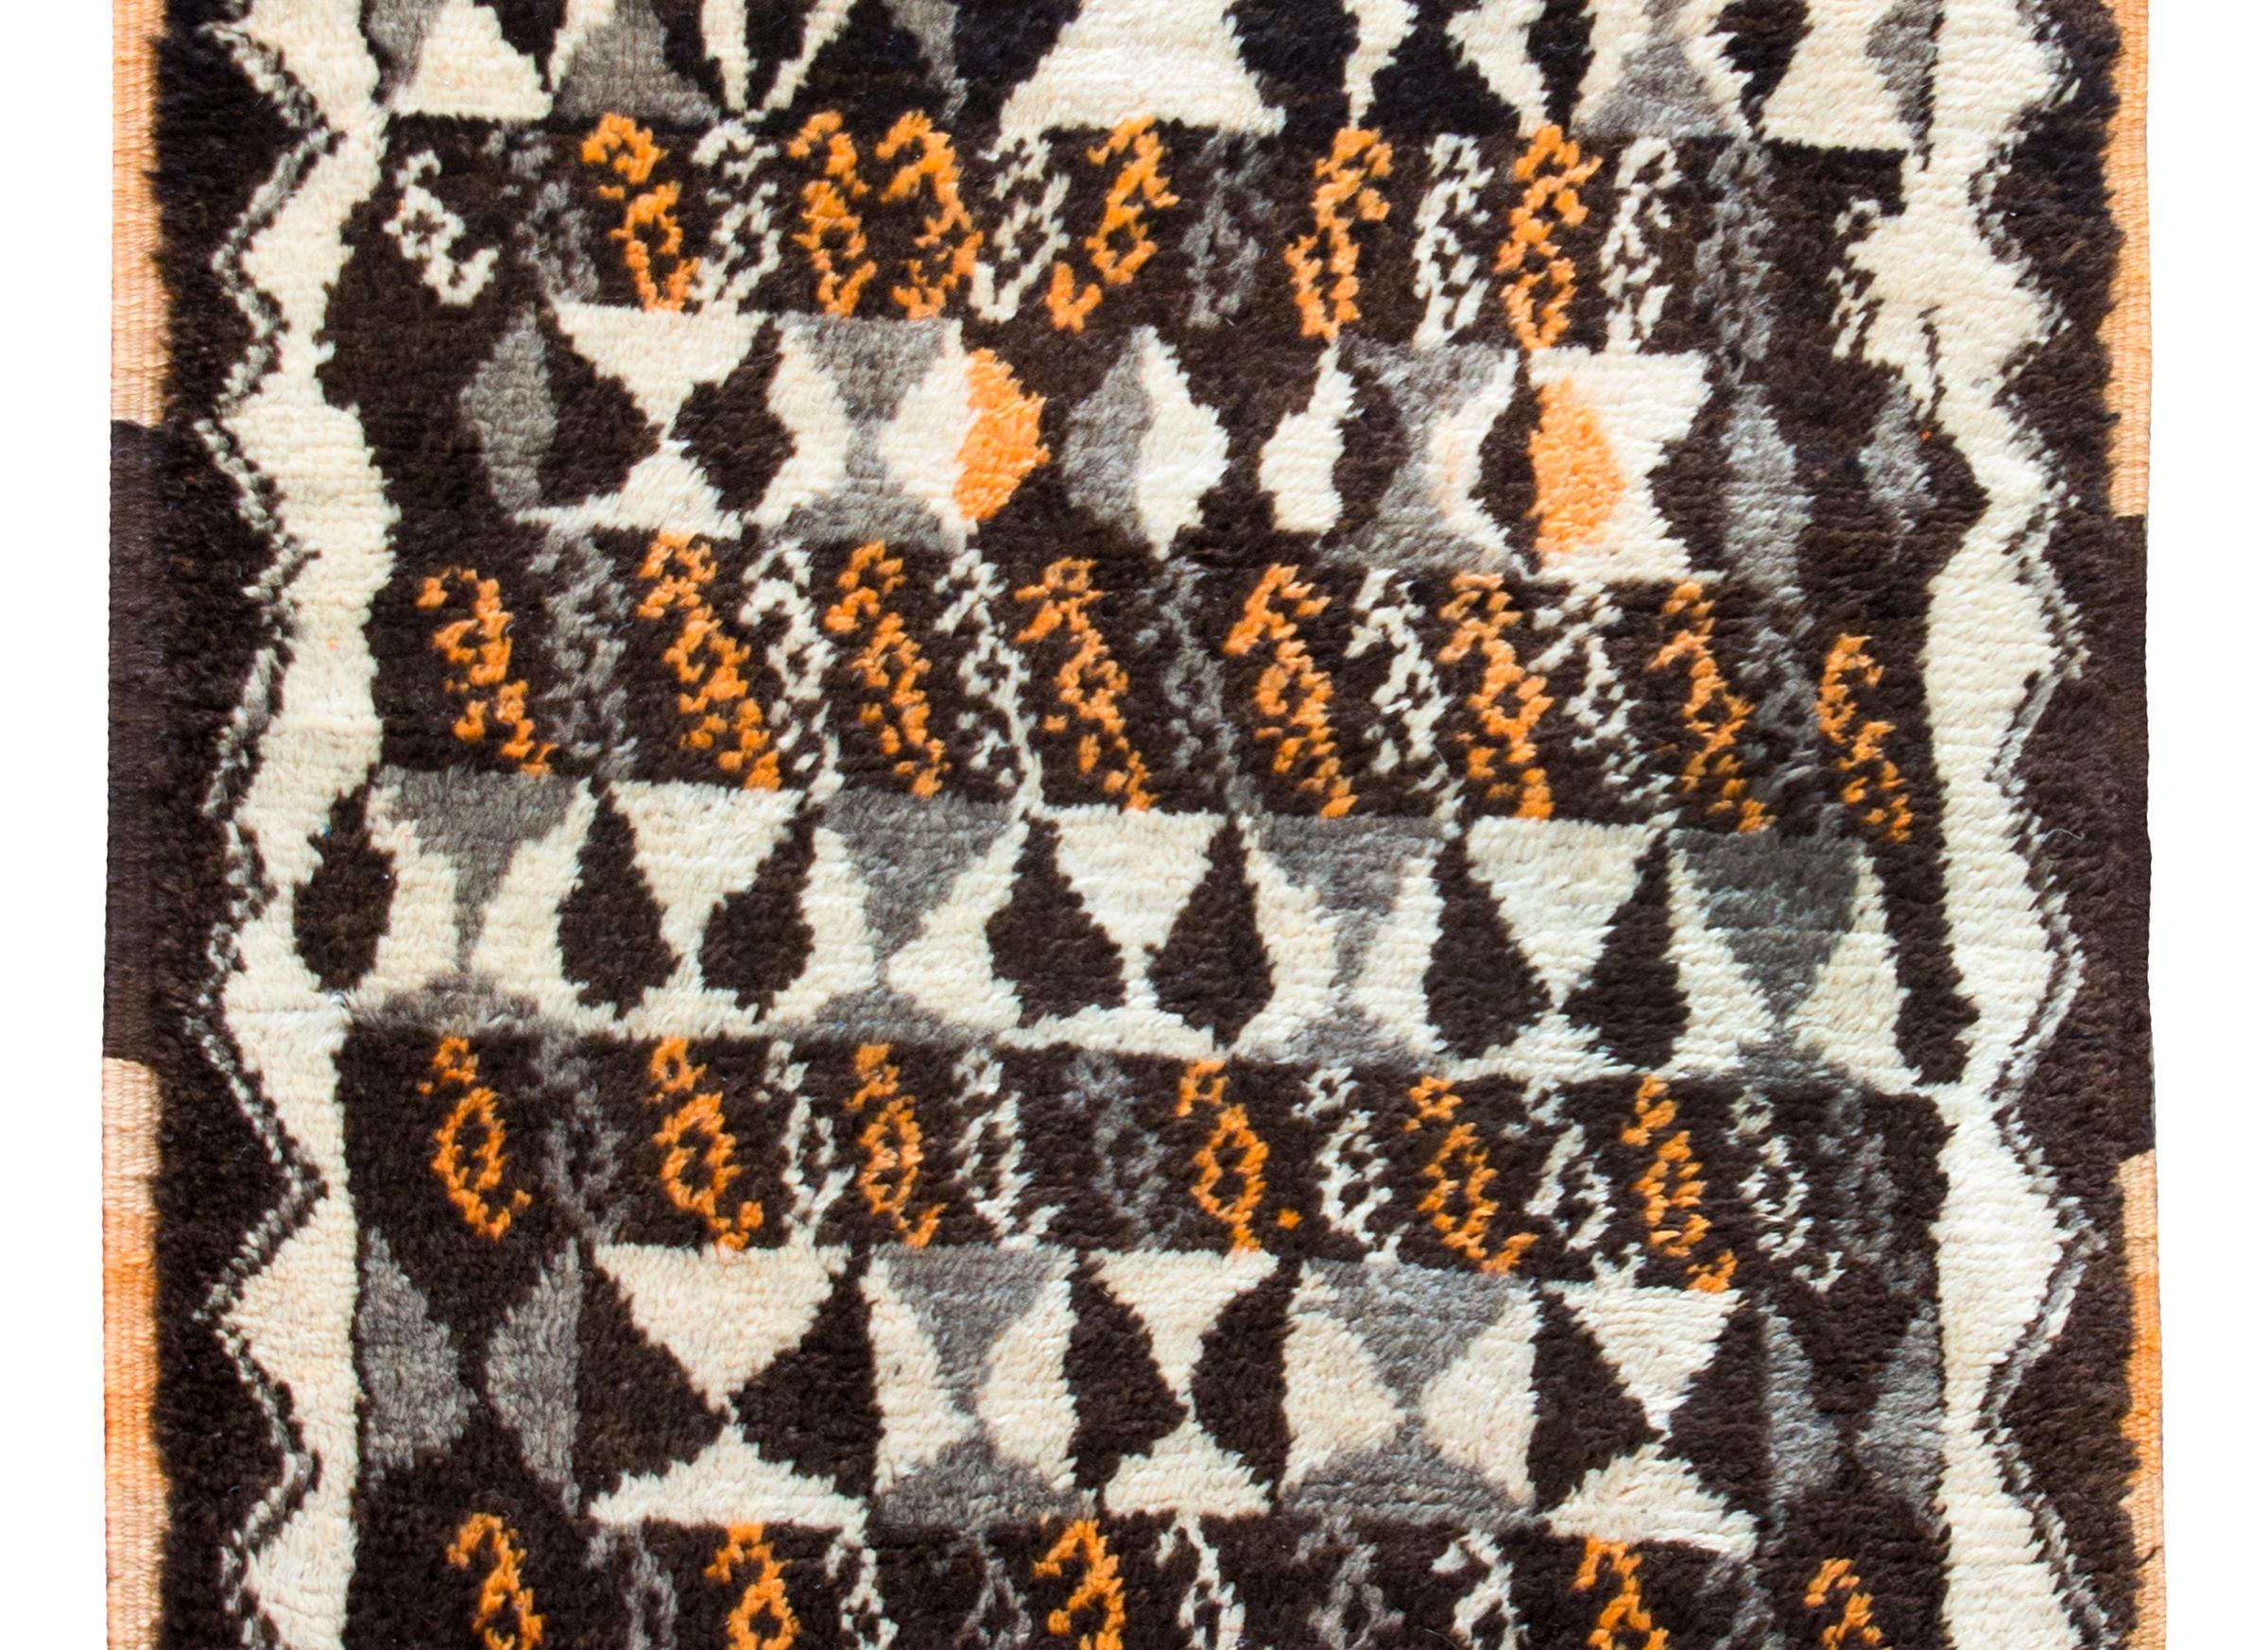 A chic vintage Moroccan rug with the best geometric pattern including myriad triangles in varying shades of gray, black, white, and orange, surrounded by a zigzag patterned border woven in similar colors as the field.